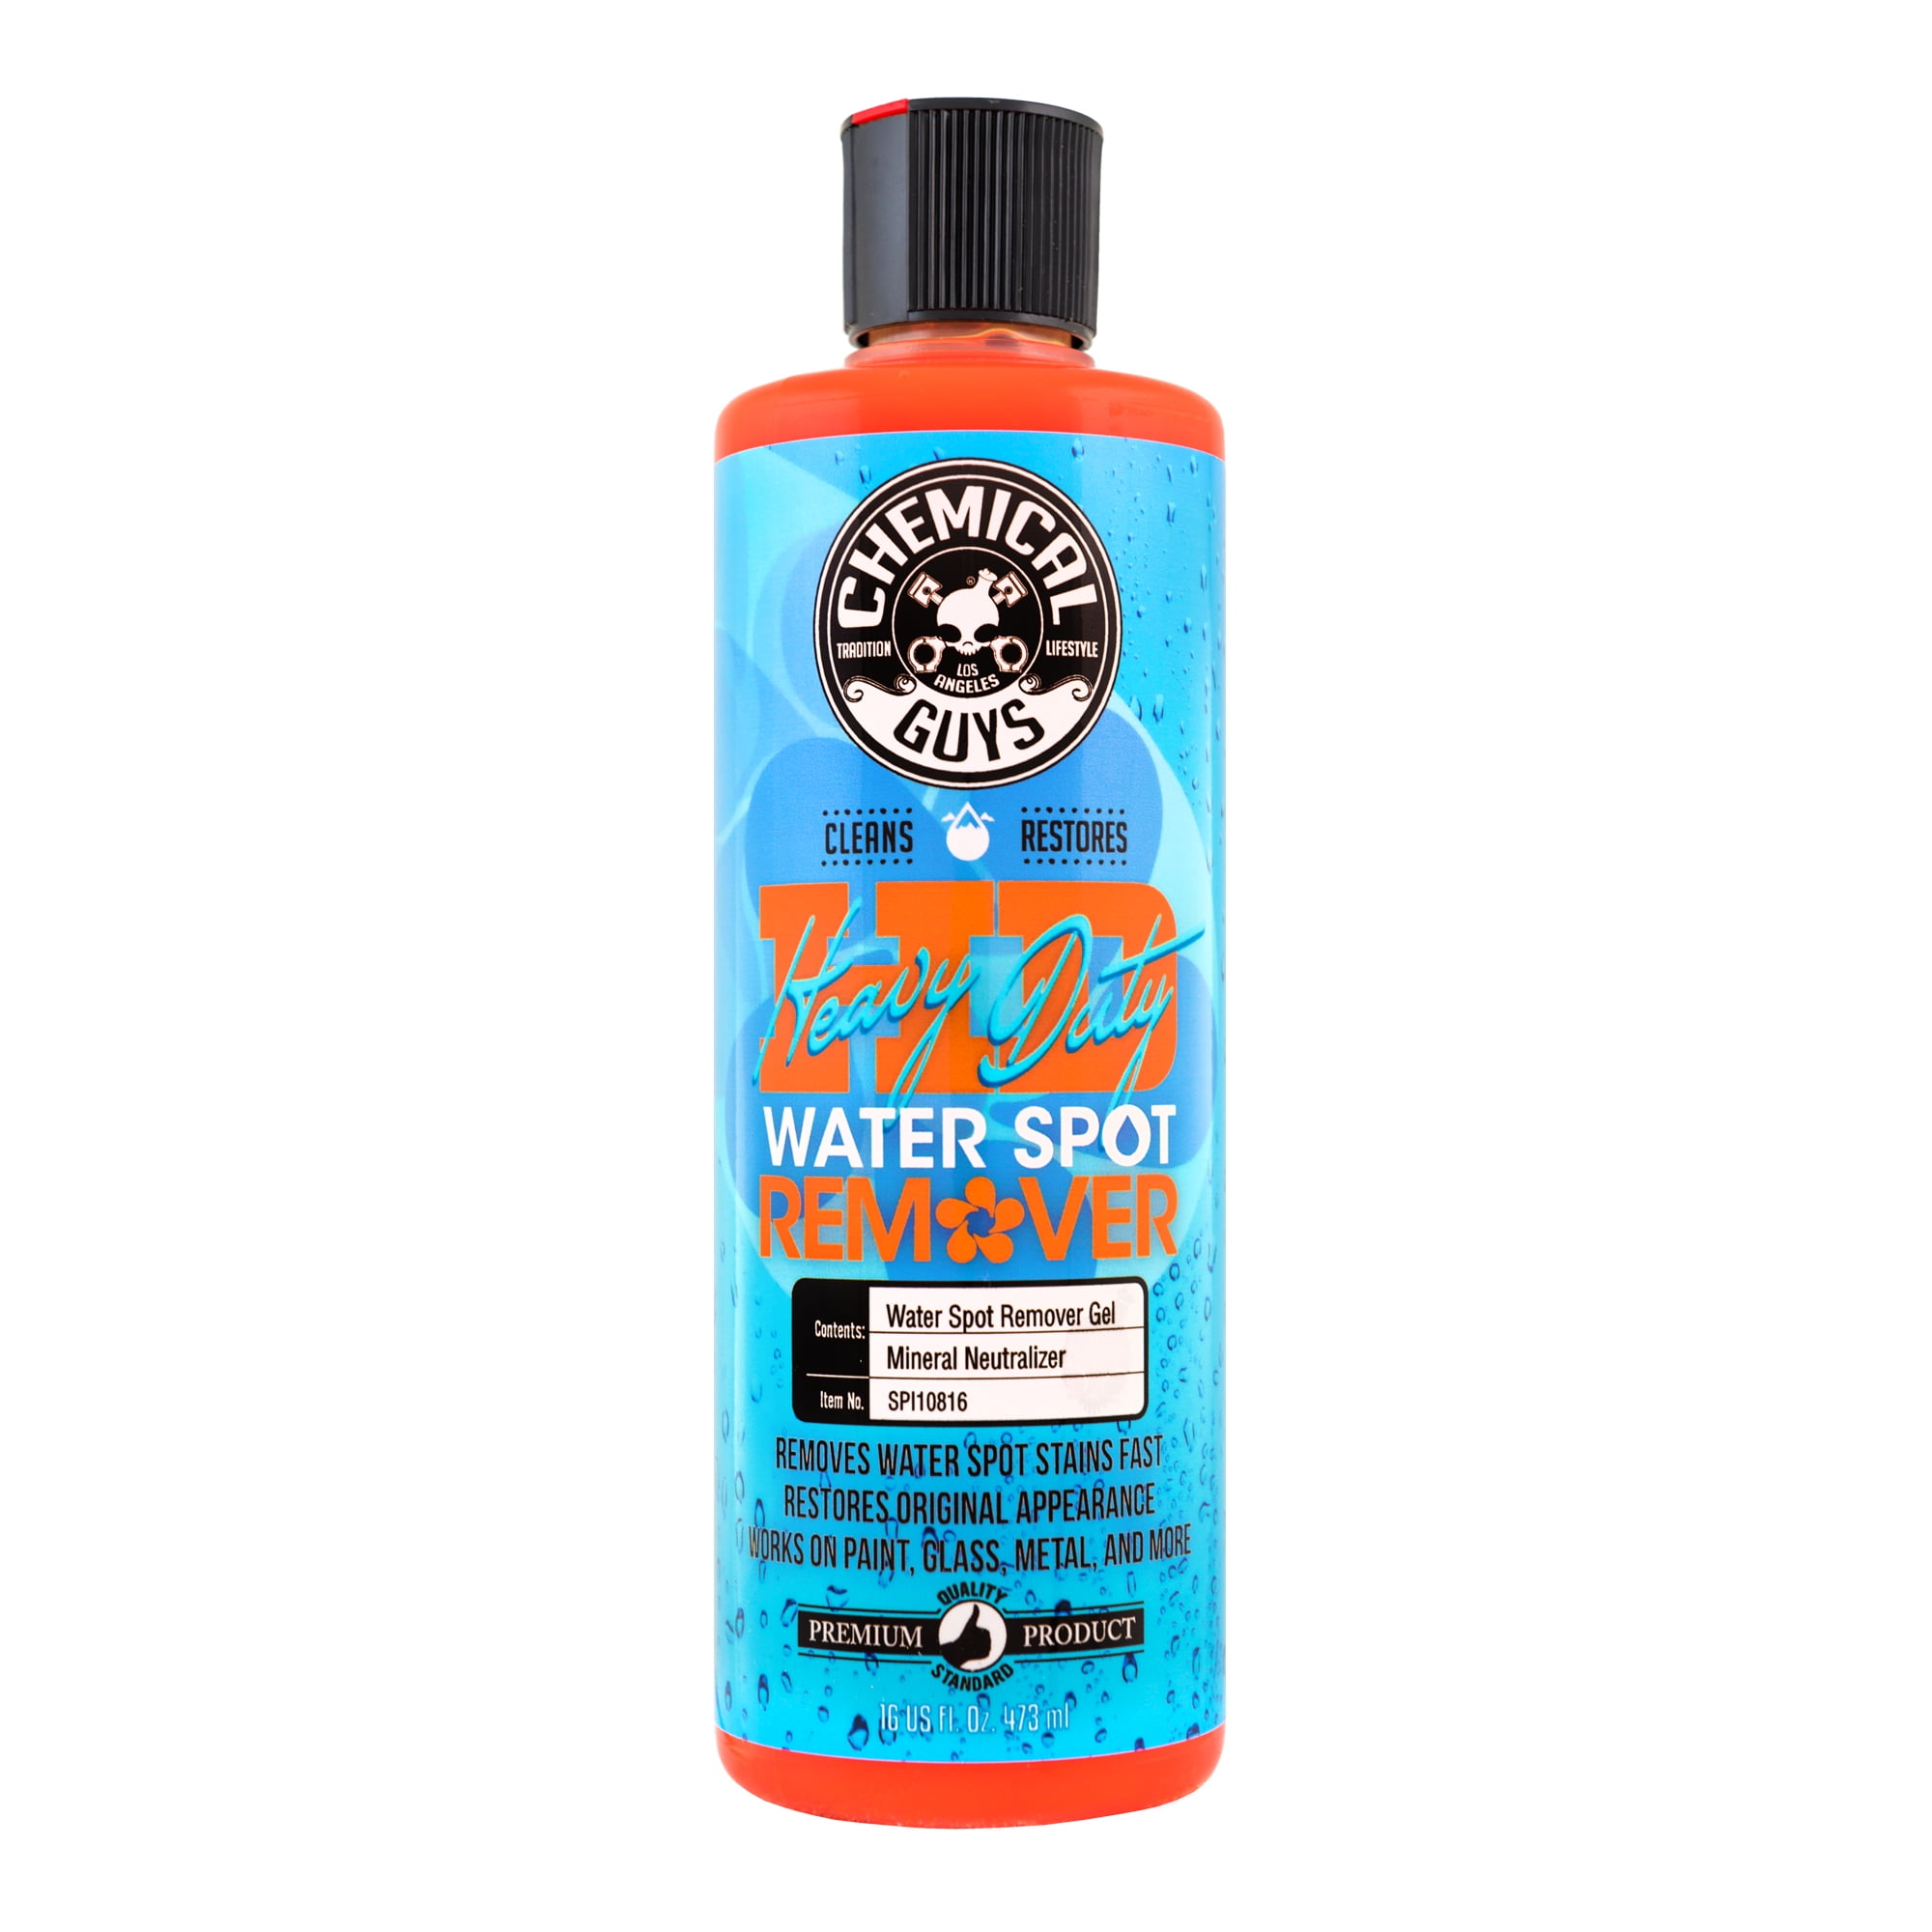  Chemical Guys SPI1081602 Heavy Duty Water Spot Remover, Safe  for Cars, Trucks, Motorcycles, RVs, Home, Office & More, (2 Pack) 16 fl oz  : Everything Else